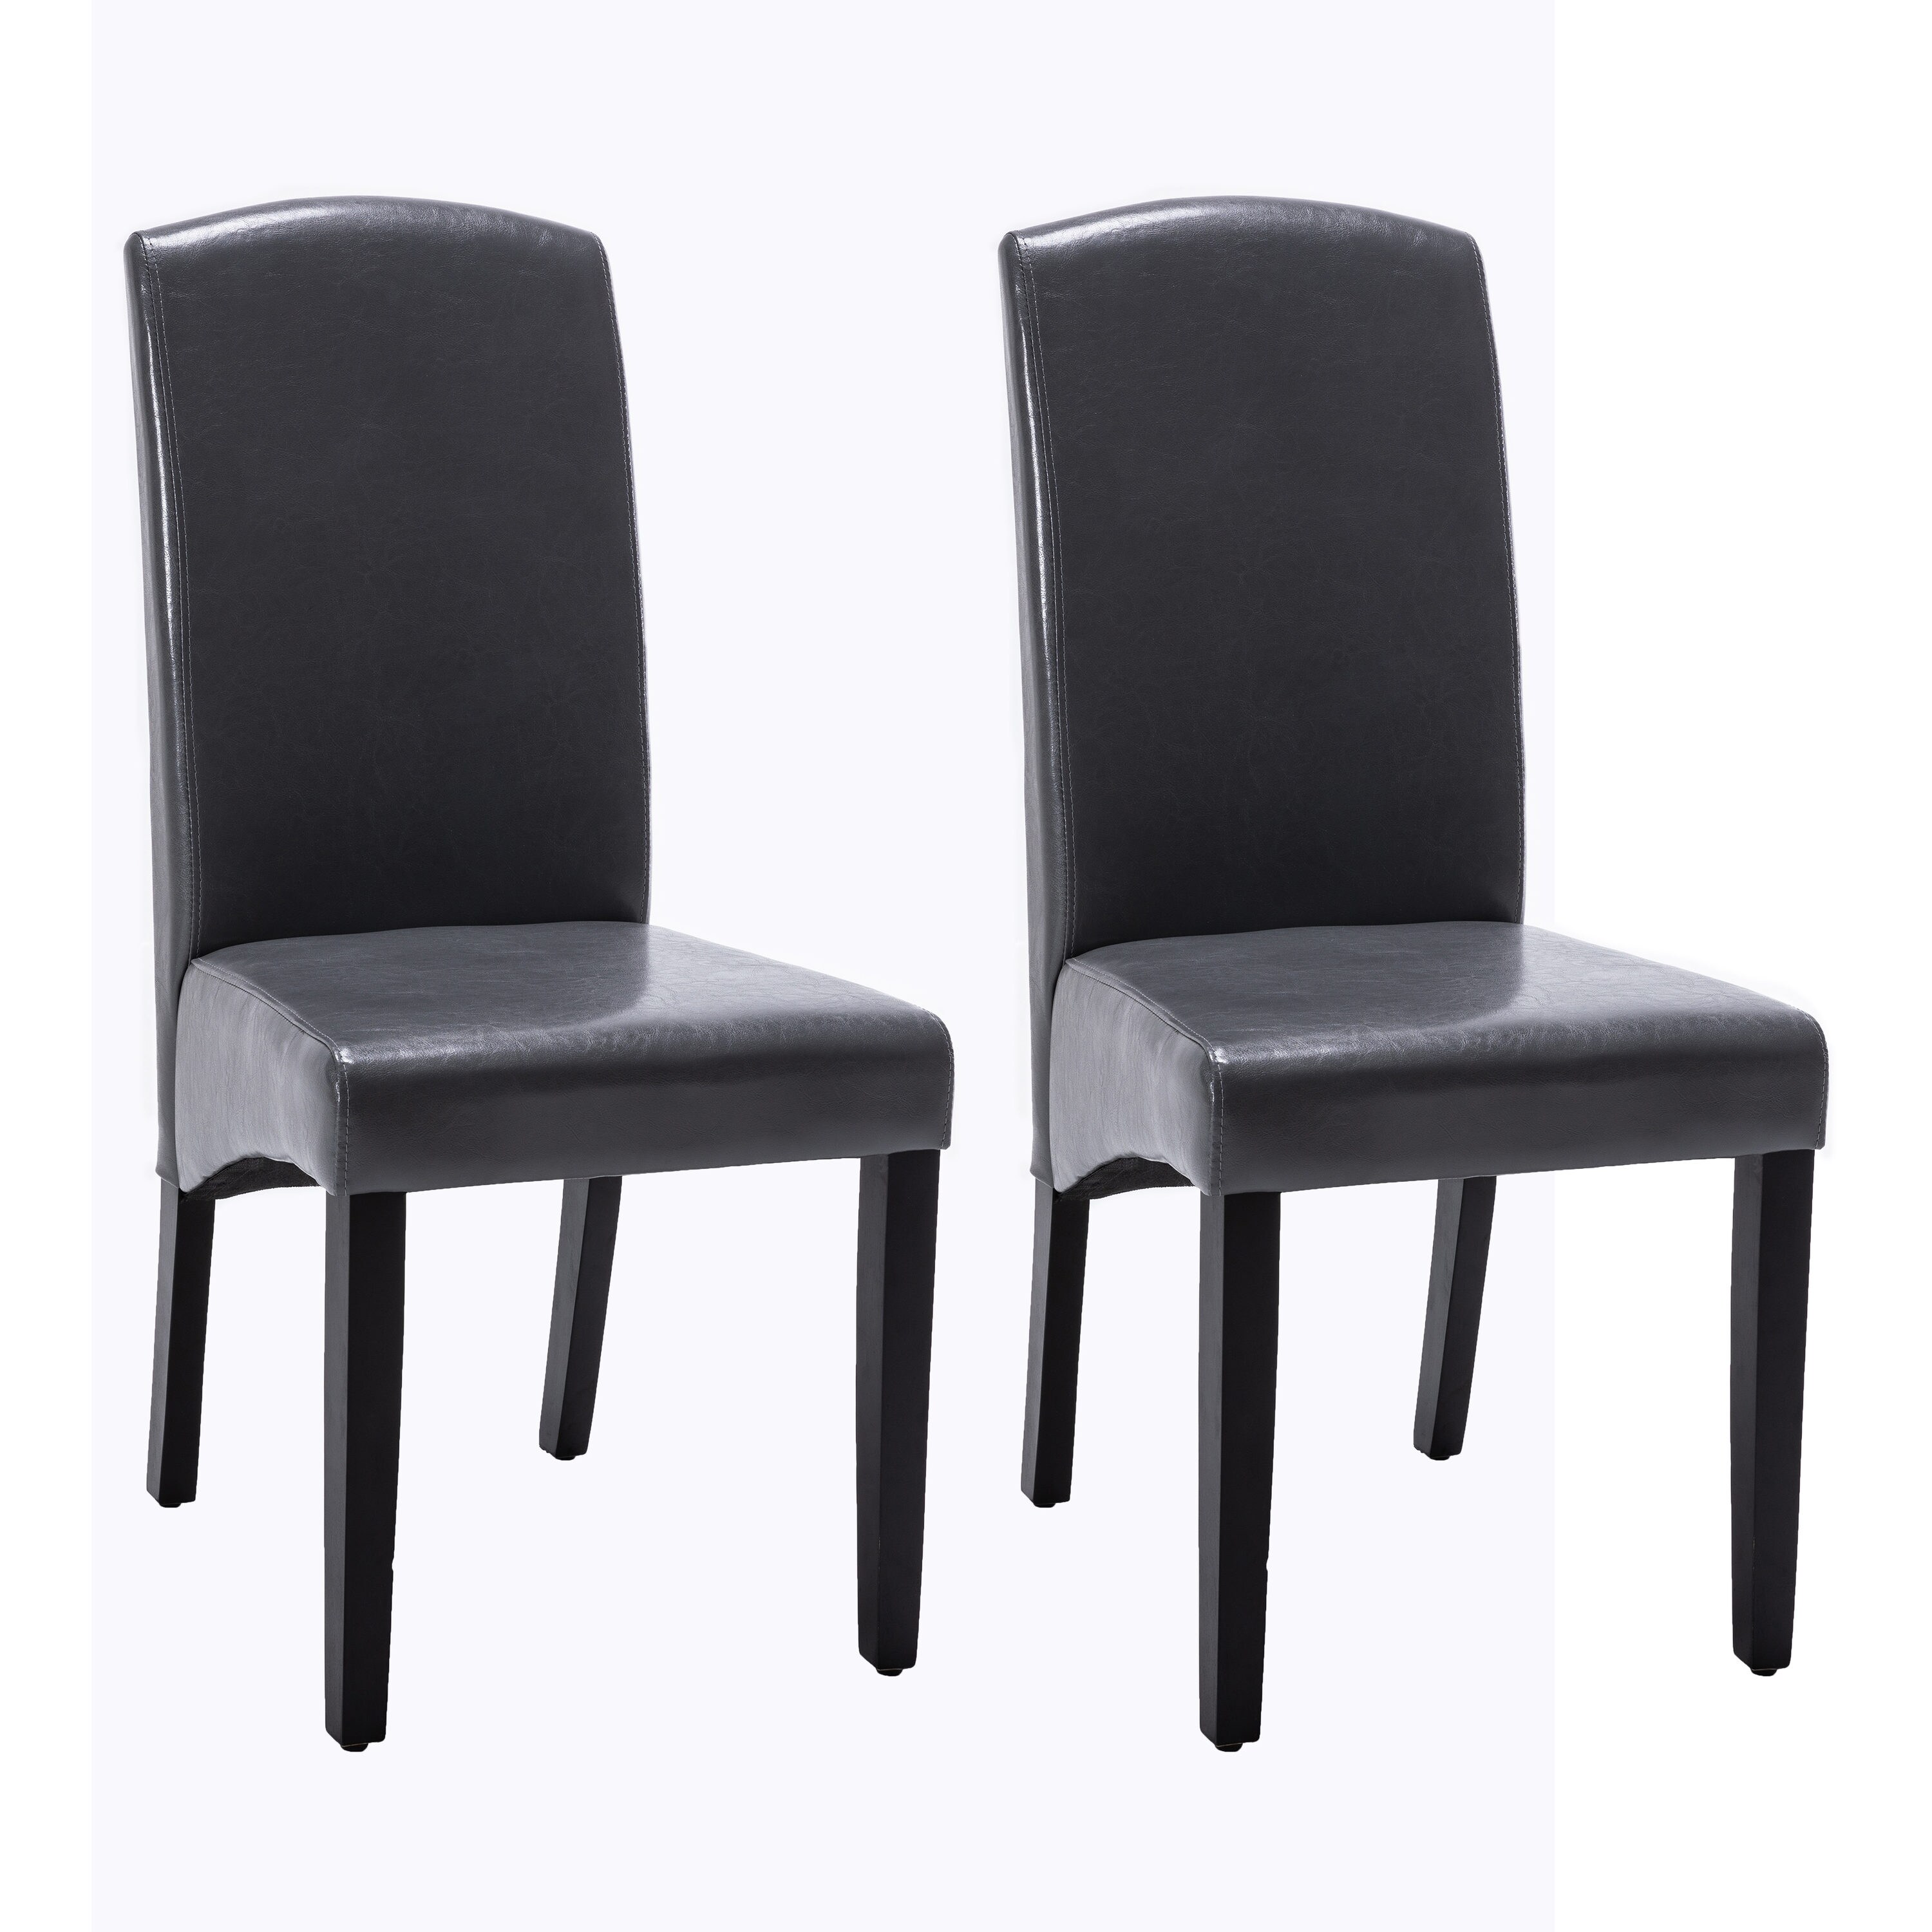 Slipper Chairs at Lowes.com